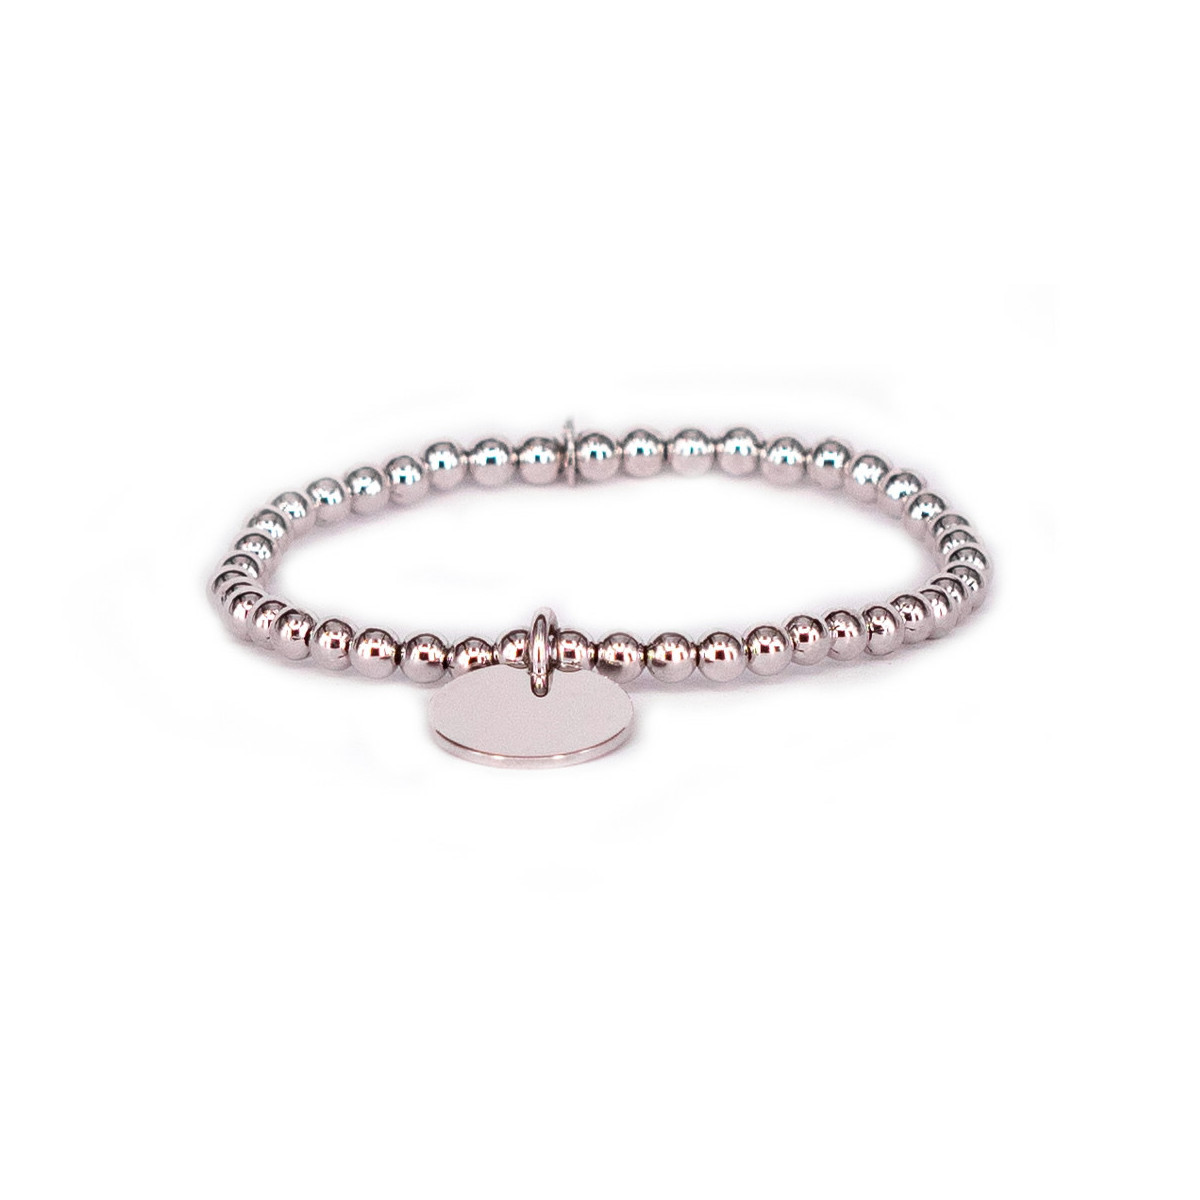 BRACELET SILVER RHODIUM AND PLATE